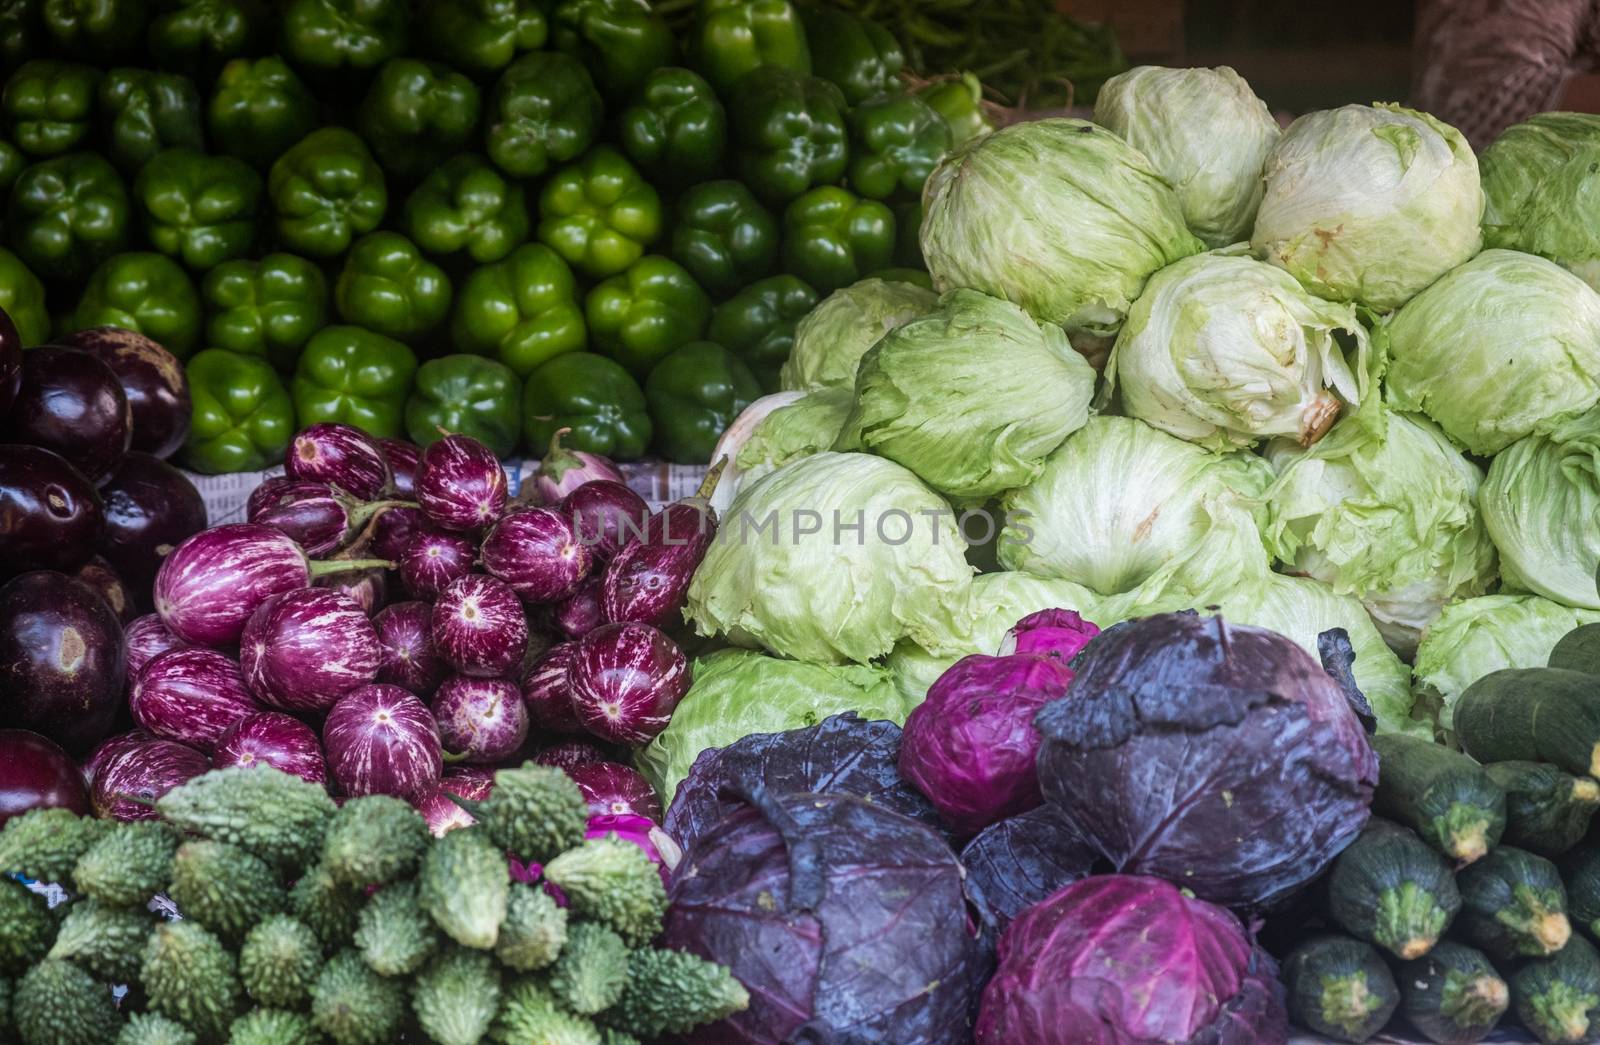 Various Vegetables For Sale by snep_photo